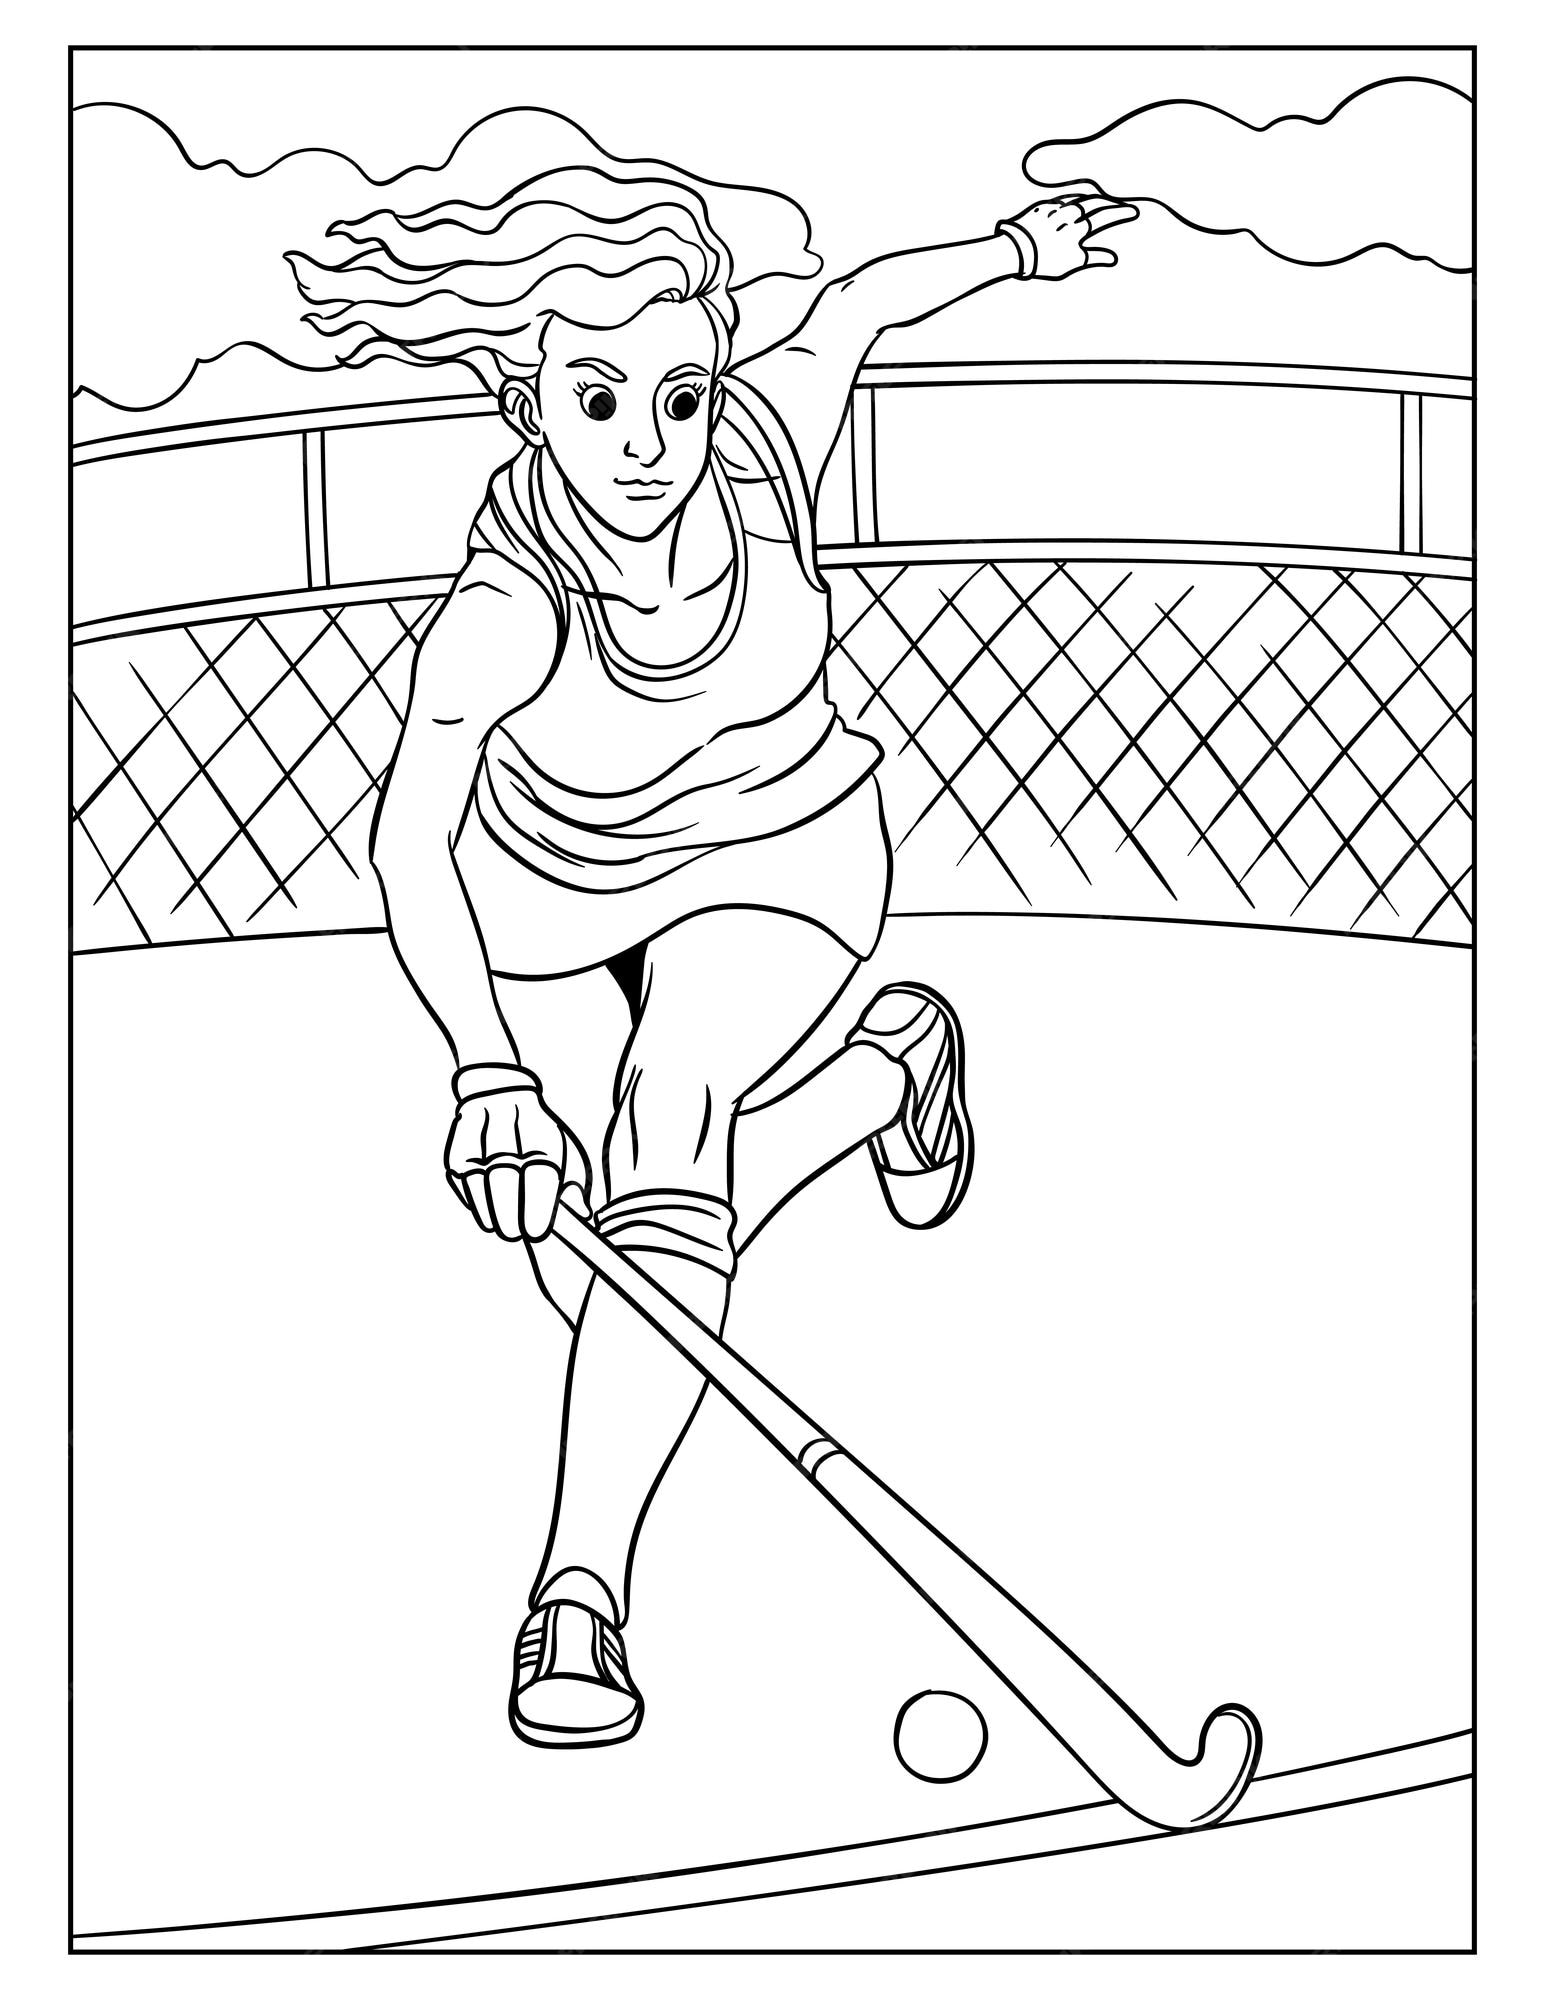 Premium vector field hockey coloring page for kids